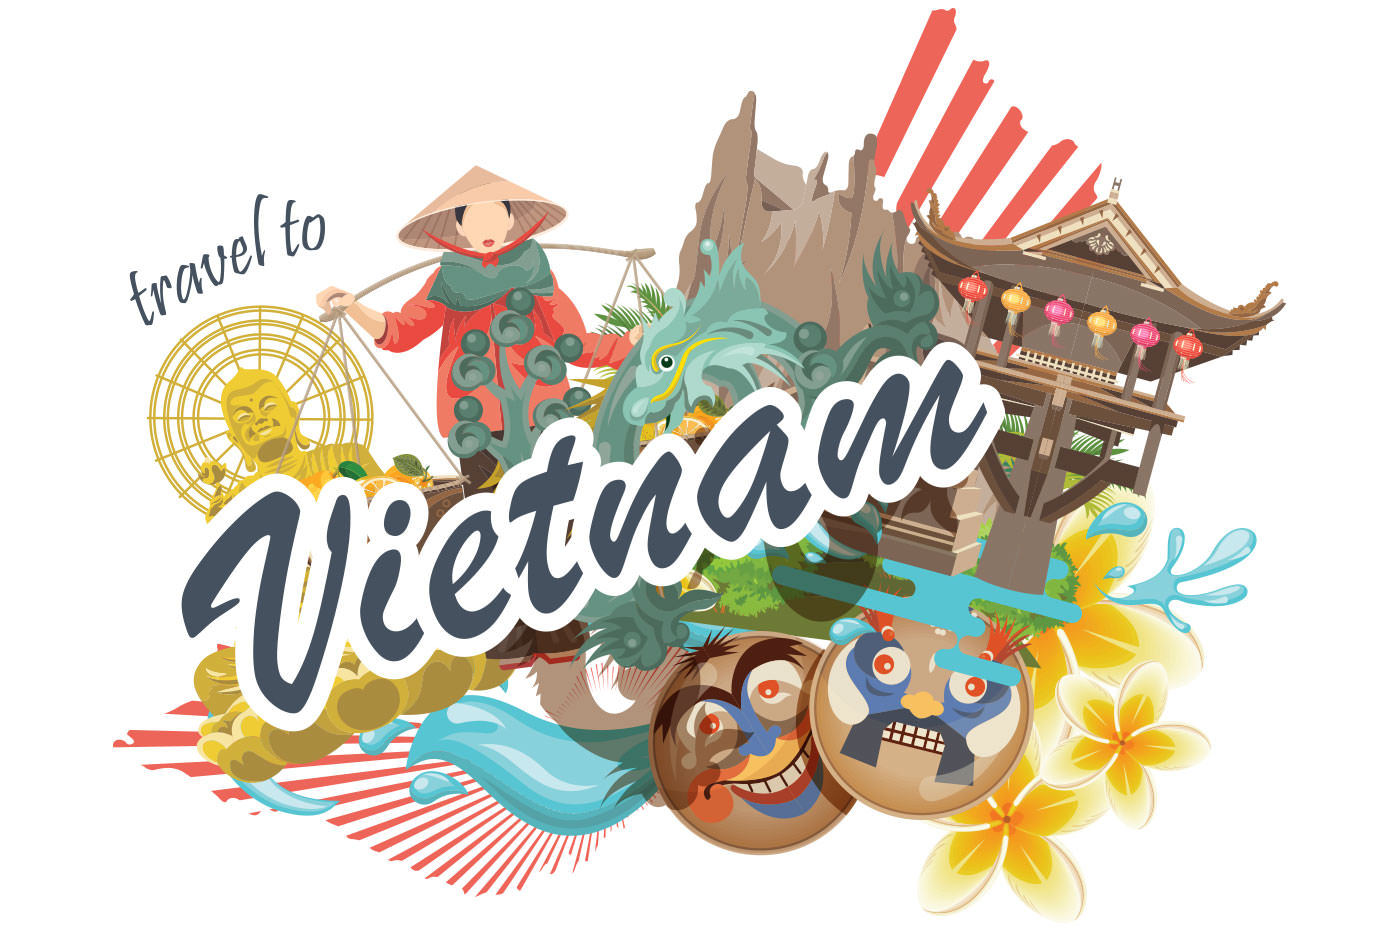 A travel to Vietnam poster